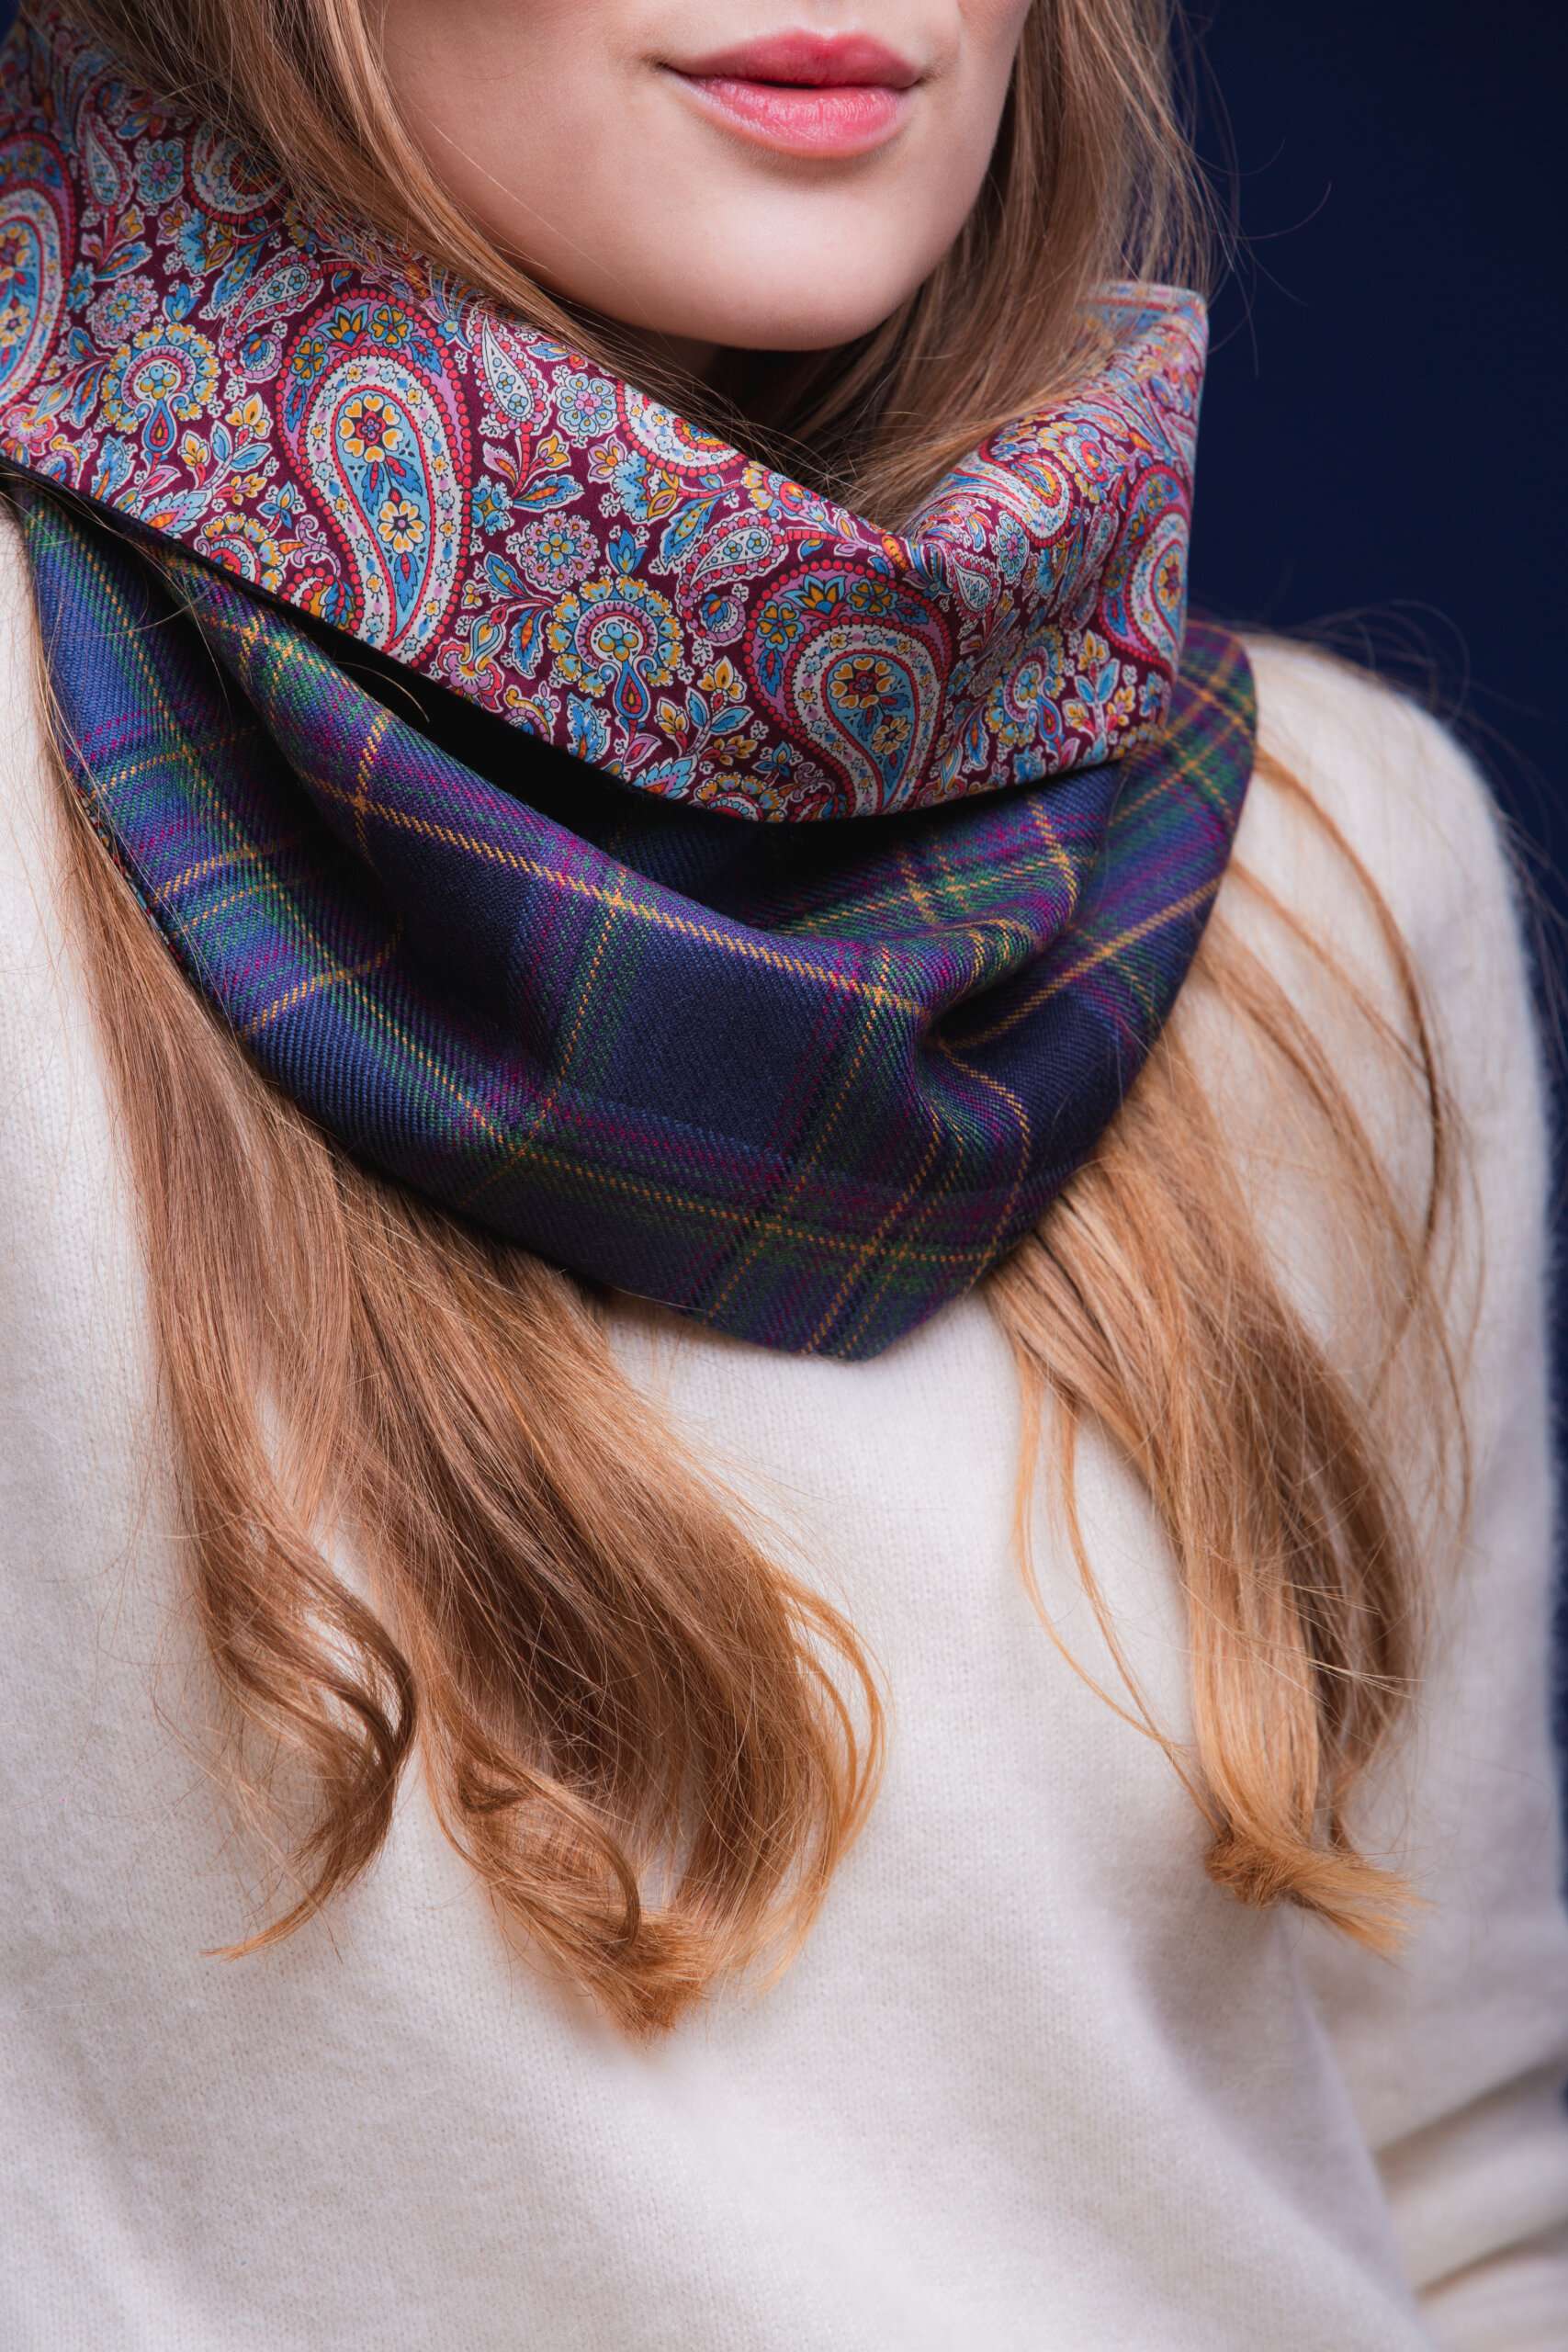 LoullyMakes Studio 4 56 scaled Classic Cowl in our exclusive Highland Mist Tartan with Liberty Print tana lawn cotton lining. Simply select your choice of coloured lining from the drop-down menu. (The example cowl pictured here features lining 7) This easy-to-wear cowl combines effortless styling and sublime warmth, being formed from a simple superfine cotton lined "tube" of 100% wool Highland Mist Tartan. Simply pop over your head and wear the cowl high, to keep out the chill, or roll over the neckline to feature a flourish of an iconic art fabric. 100% Wool Tartan, 100% cotton lining